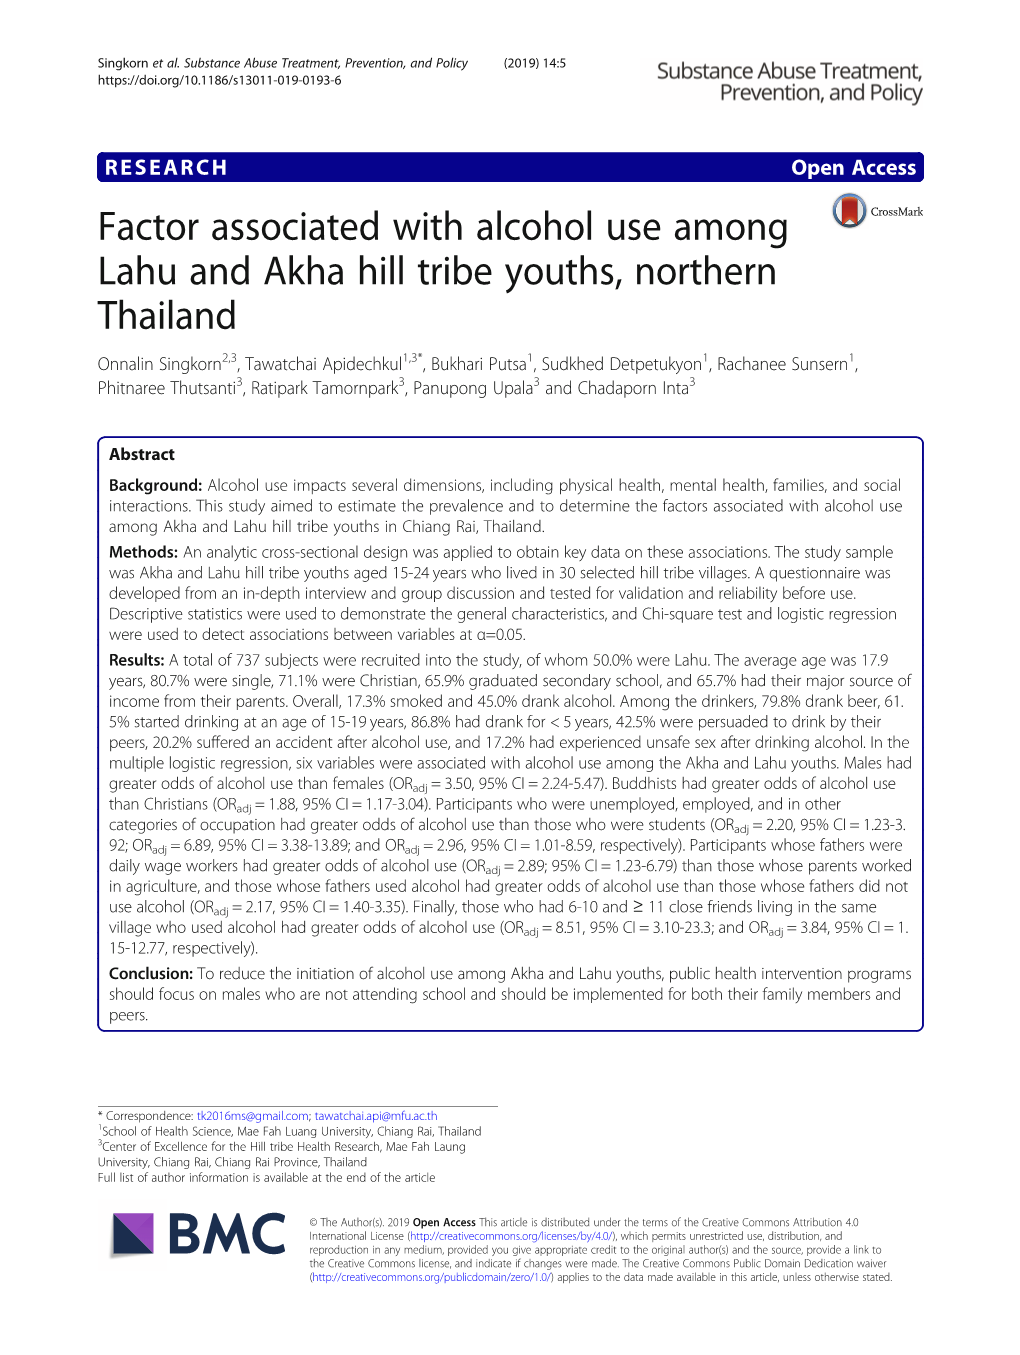 Factor Associated with Alcohol Use Among Lahu and Akha Hill Tribe